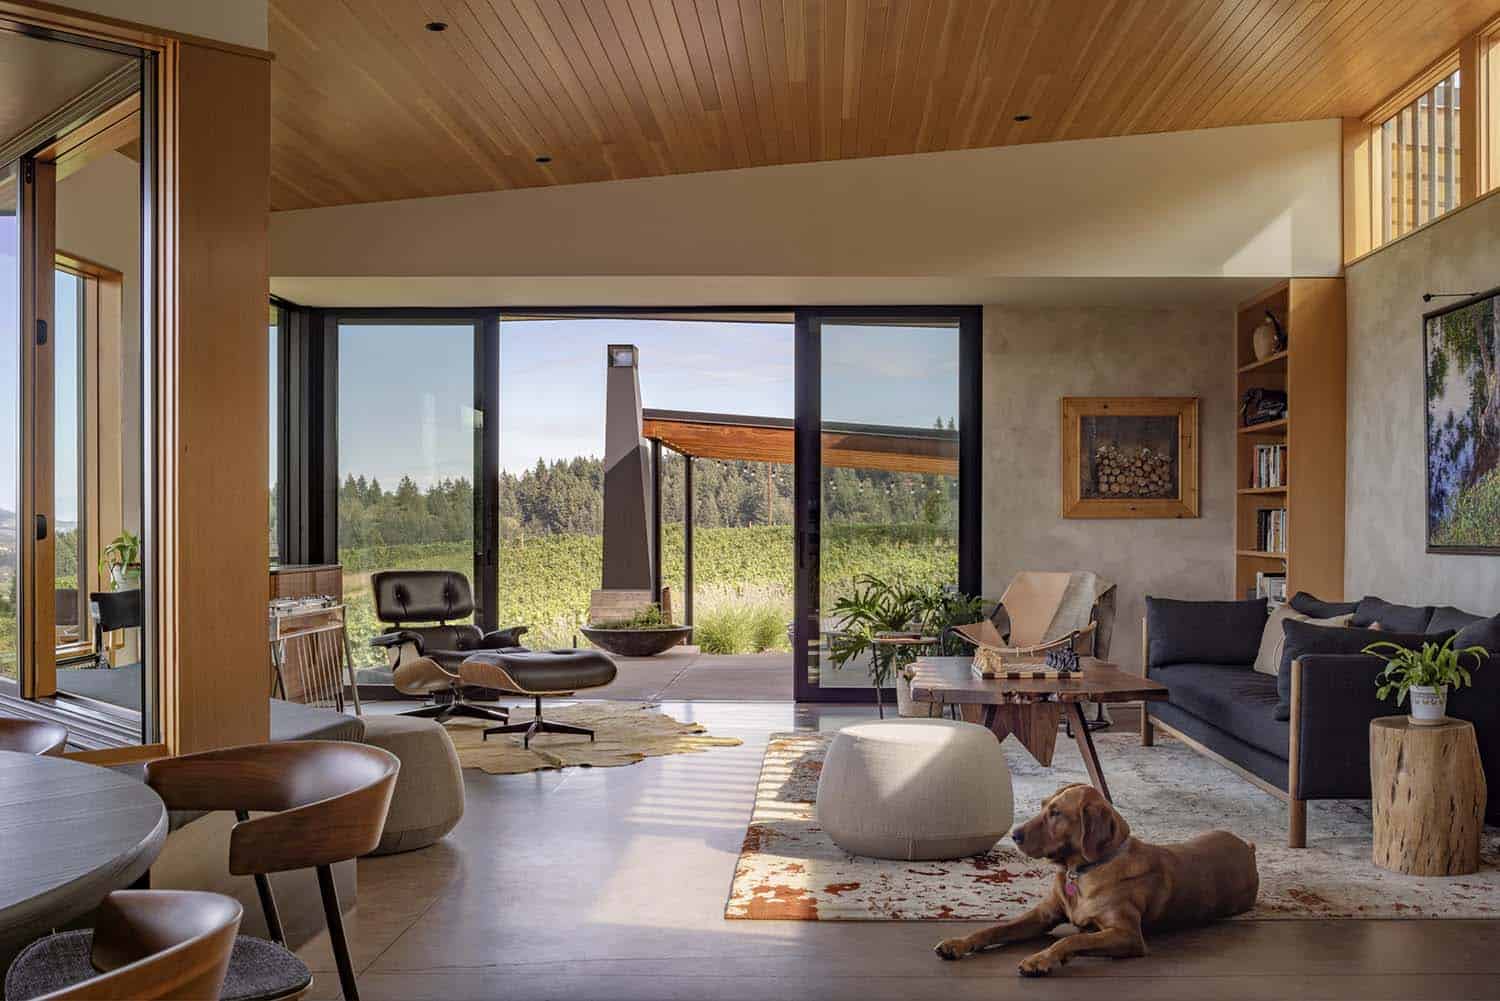 Step into this modern vineyard home in the beautiful Willamette Valley